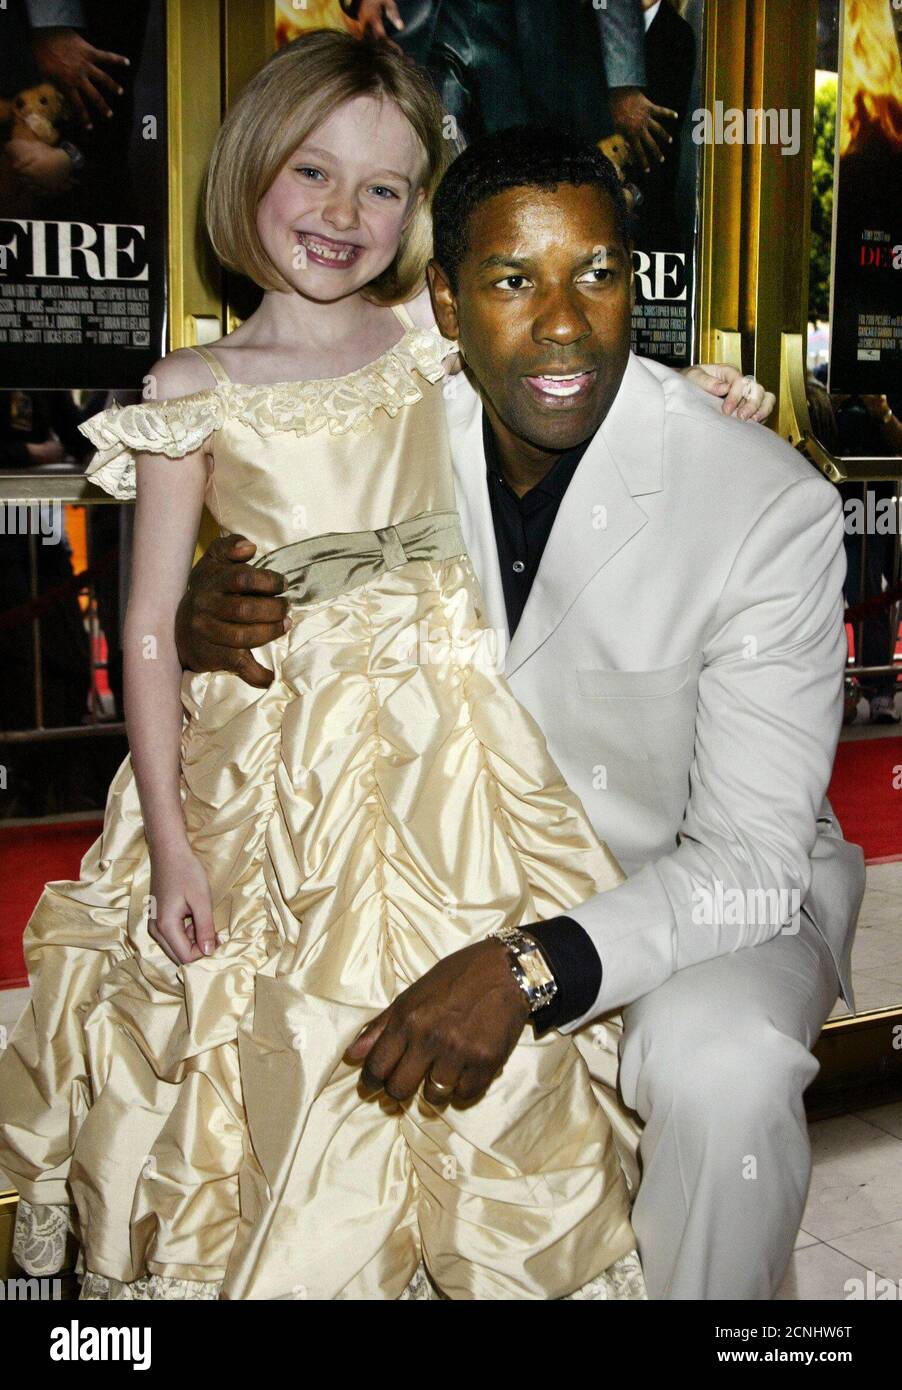 Actor Denzel Washington And Young Co Star Dakota Fanning Pose At The Premiere Of Their New Drama Film Man On Fire In Los Angeles